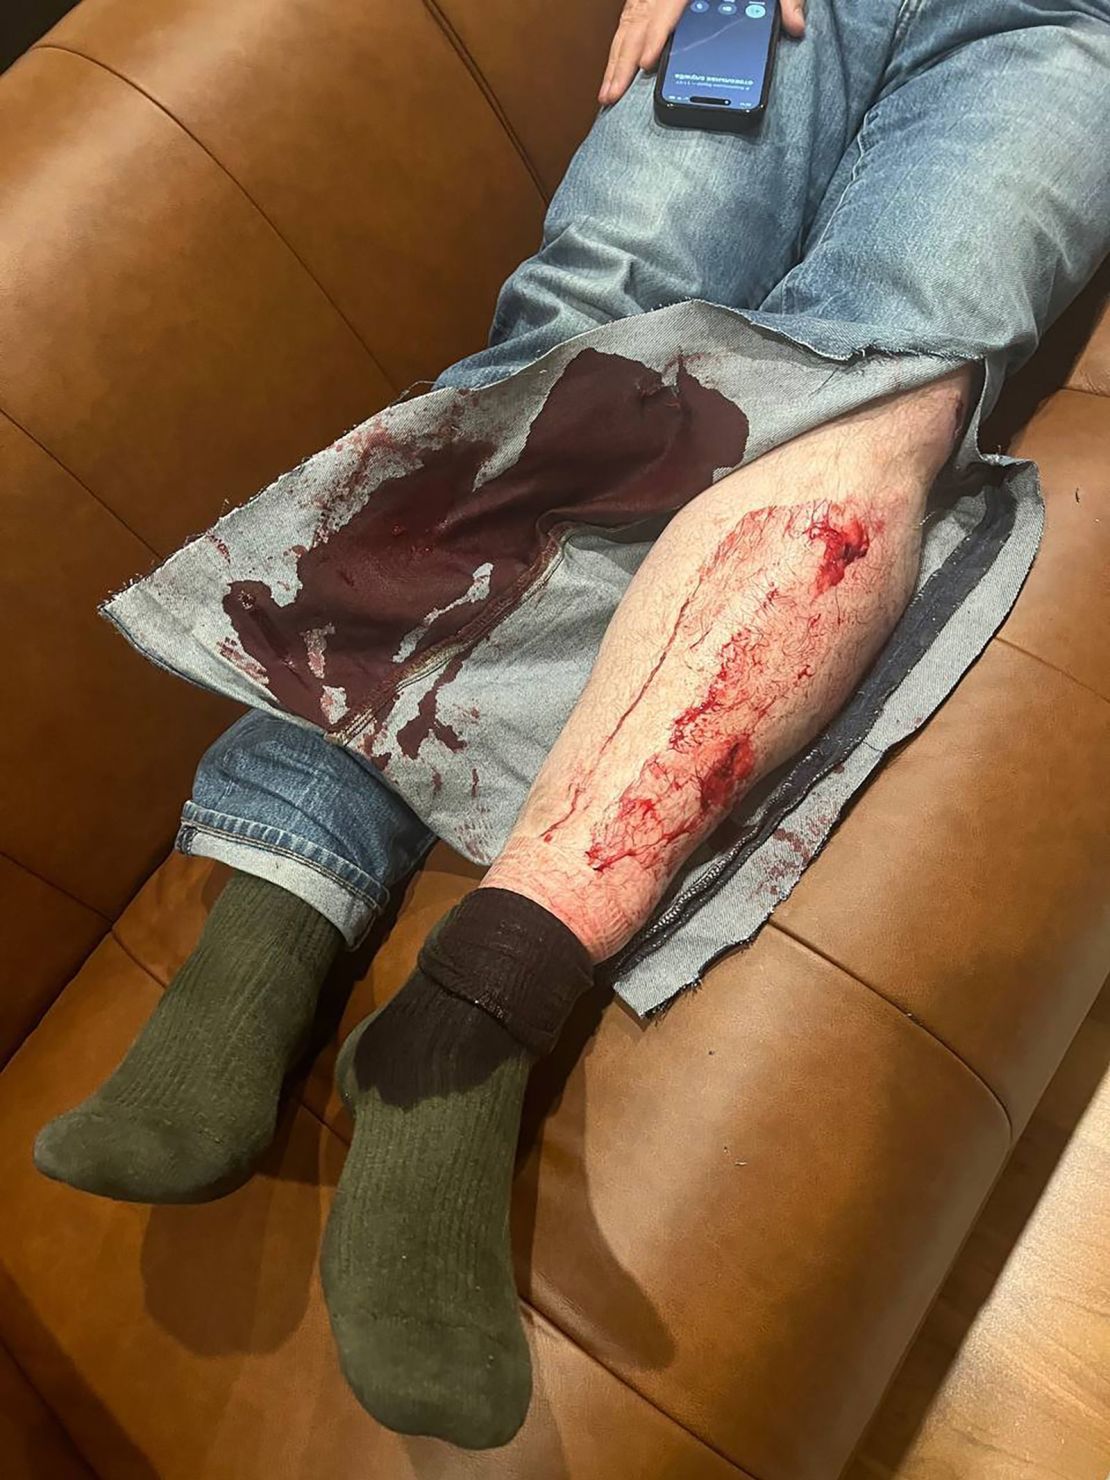 Leonid Volkov's injuries after he was attacked with a hammer outside his home.